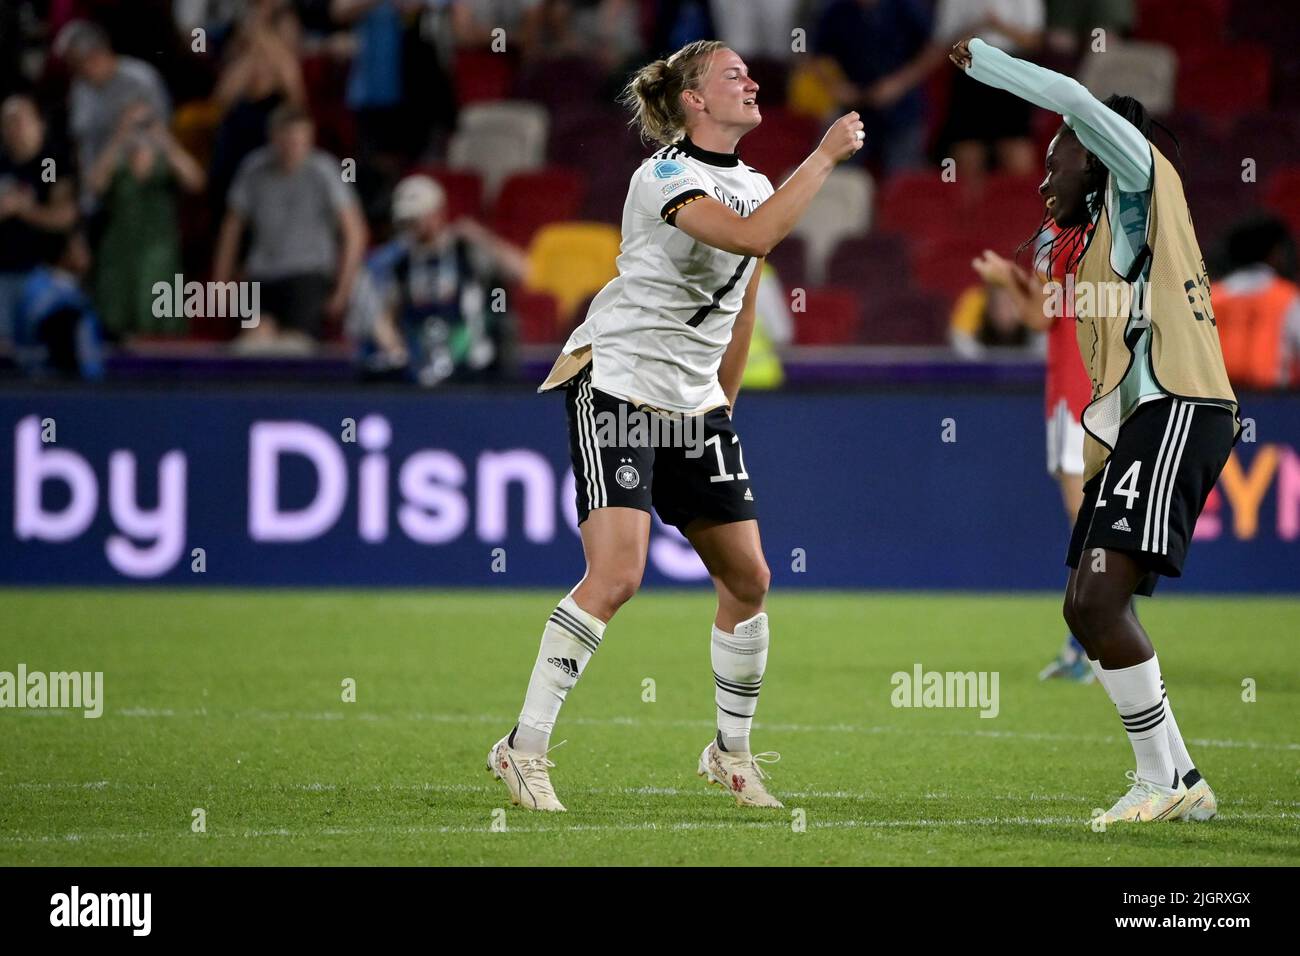 12 July 2022, Great Britain, Brentford/ London: Soccer, Women: European Championship, Germany - Spain, preliminary round, Group B, Matchday 2, Brentford Community Stadium. Germany's Alexandra Popp (l) in Lea Schüller's jersey cheers with Nicole Anyomi after the match. Photo: Sebastian Christoph Gollnow/dpa Stock Photo